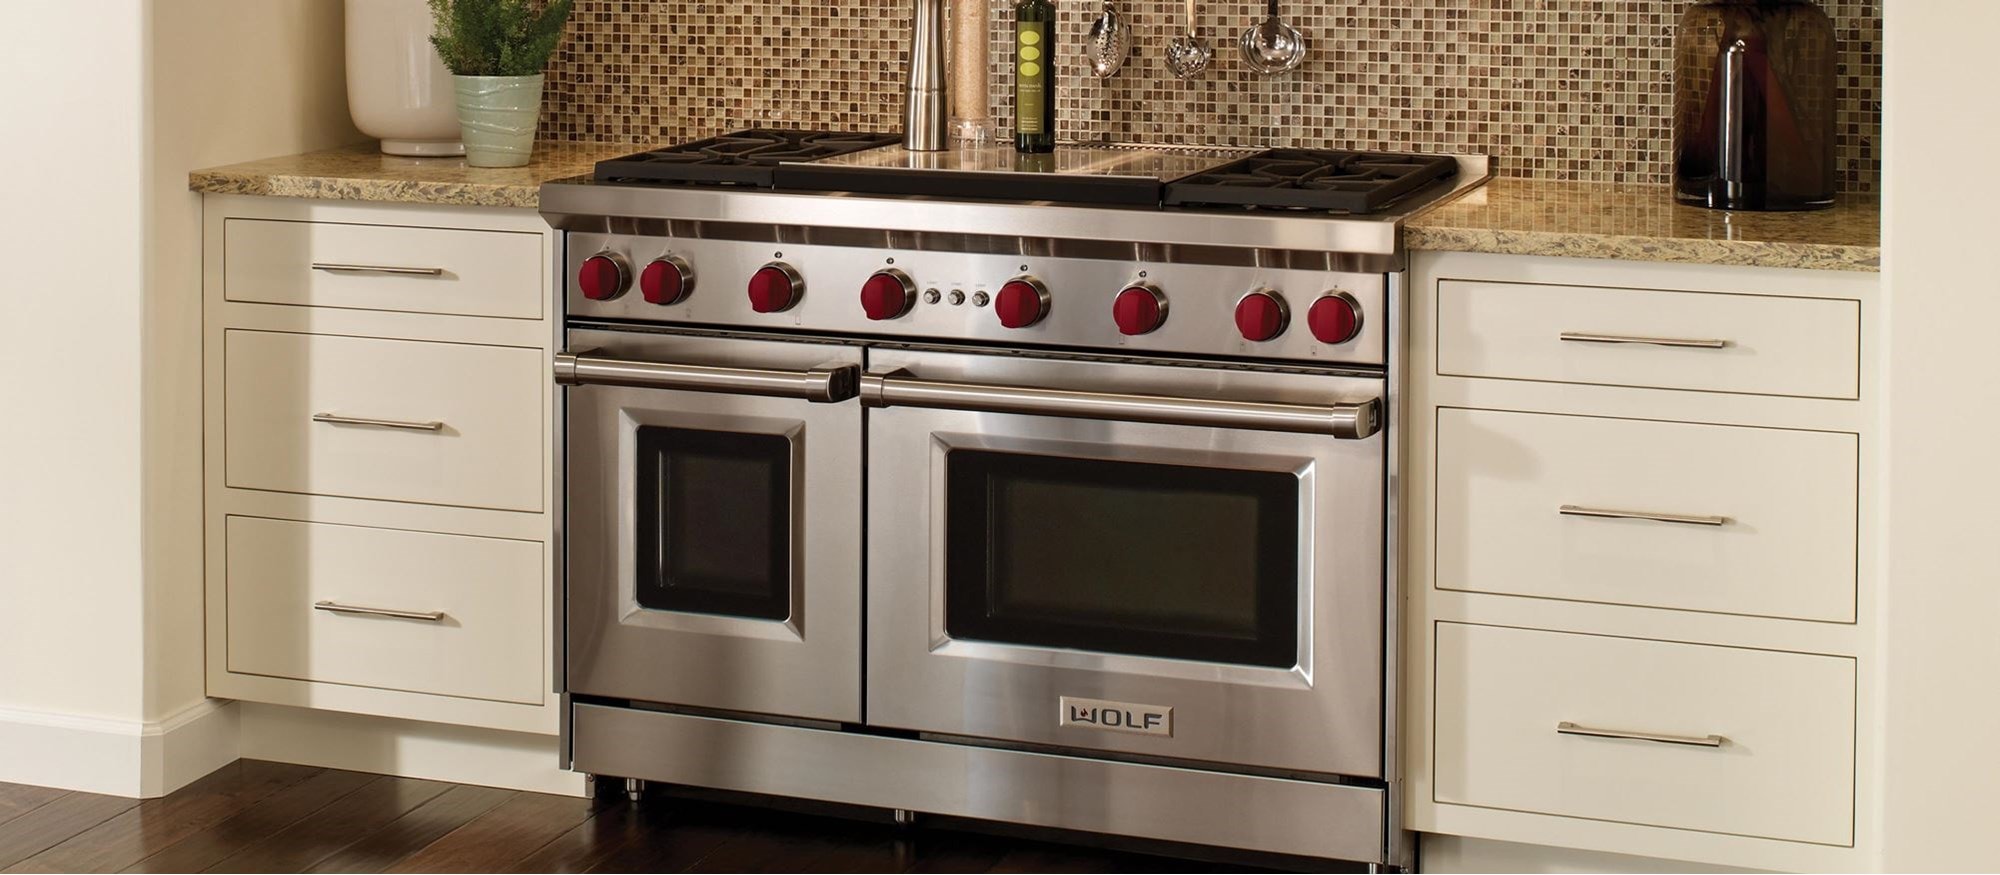 48 Dual Fuel Range - 6 Burners and Infrared Griddle